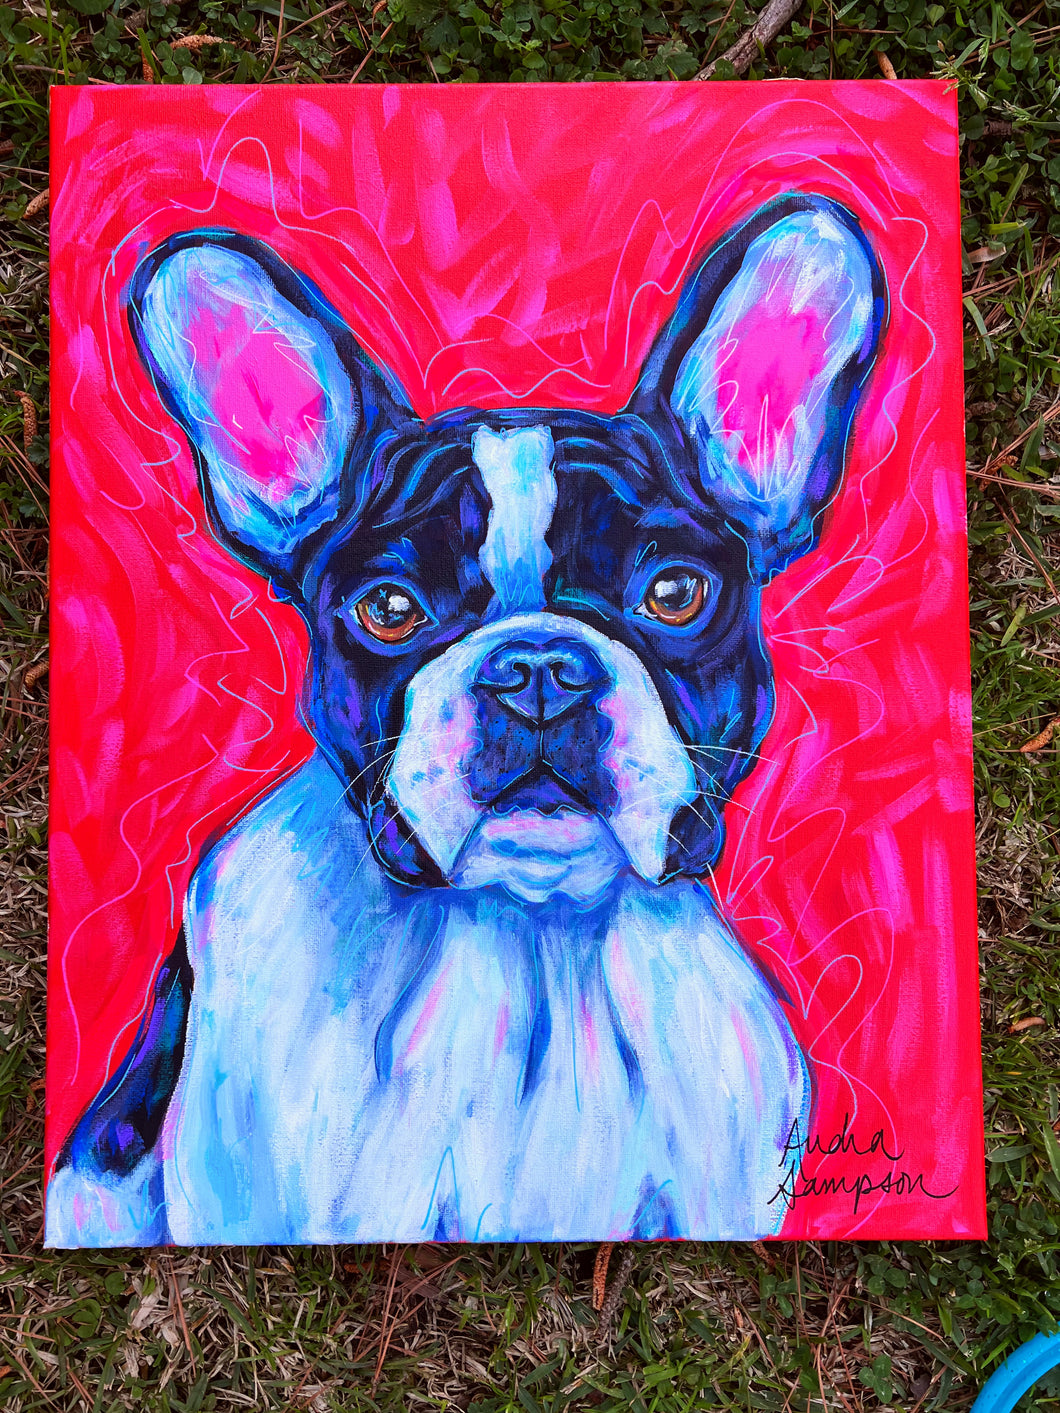 Black and White French Bulldog Original Painting on 16x20 Canvas